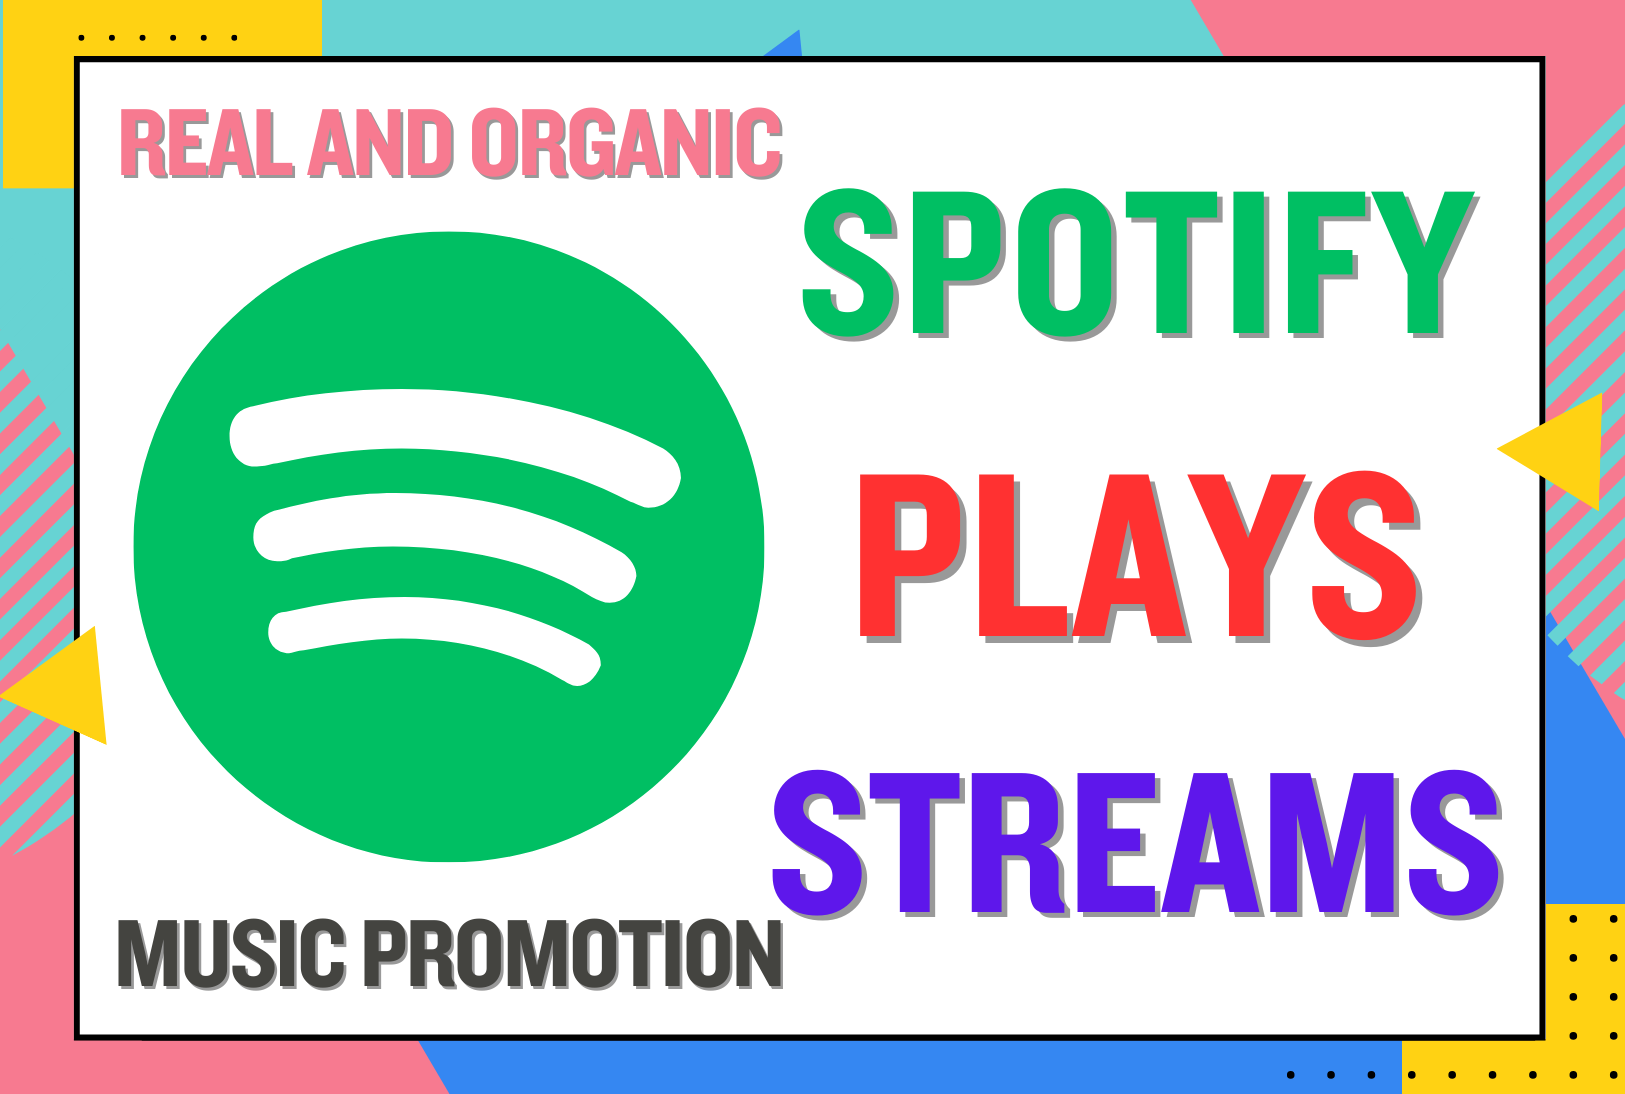 2000 Spotify plays streams | Promote your Spotify music and make it viral